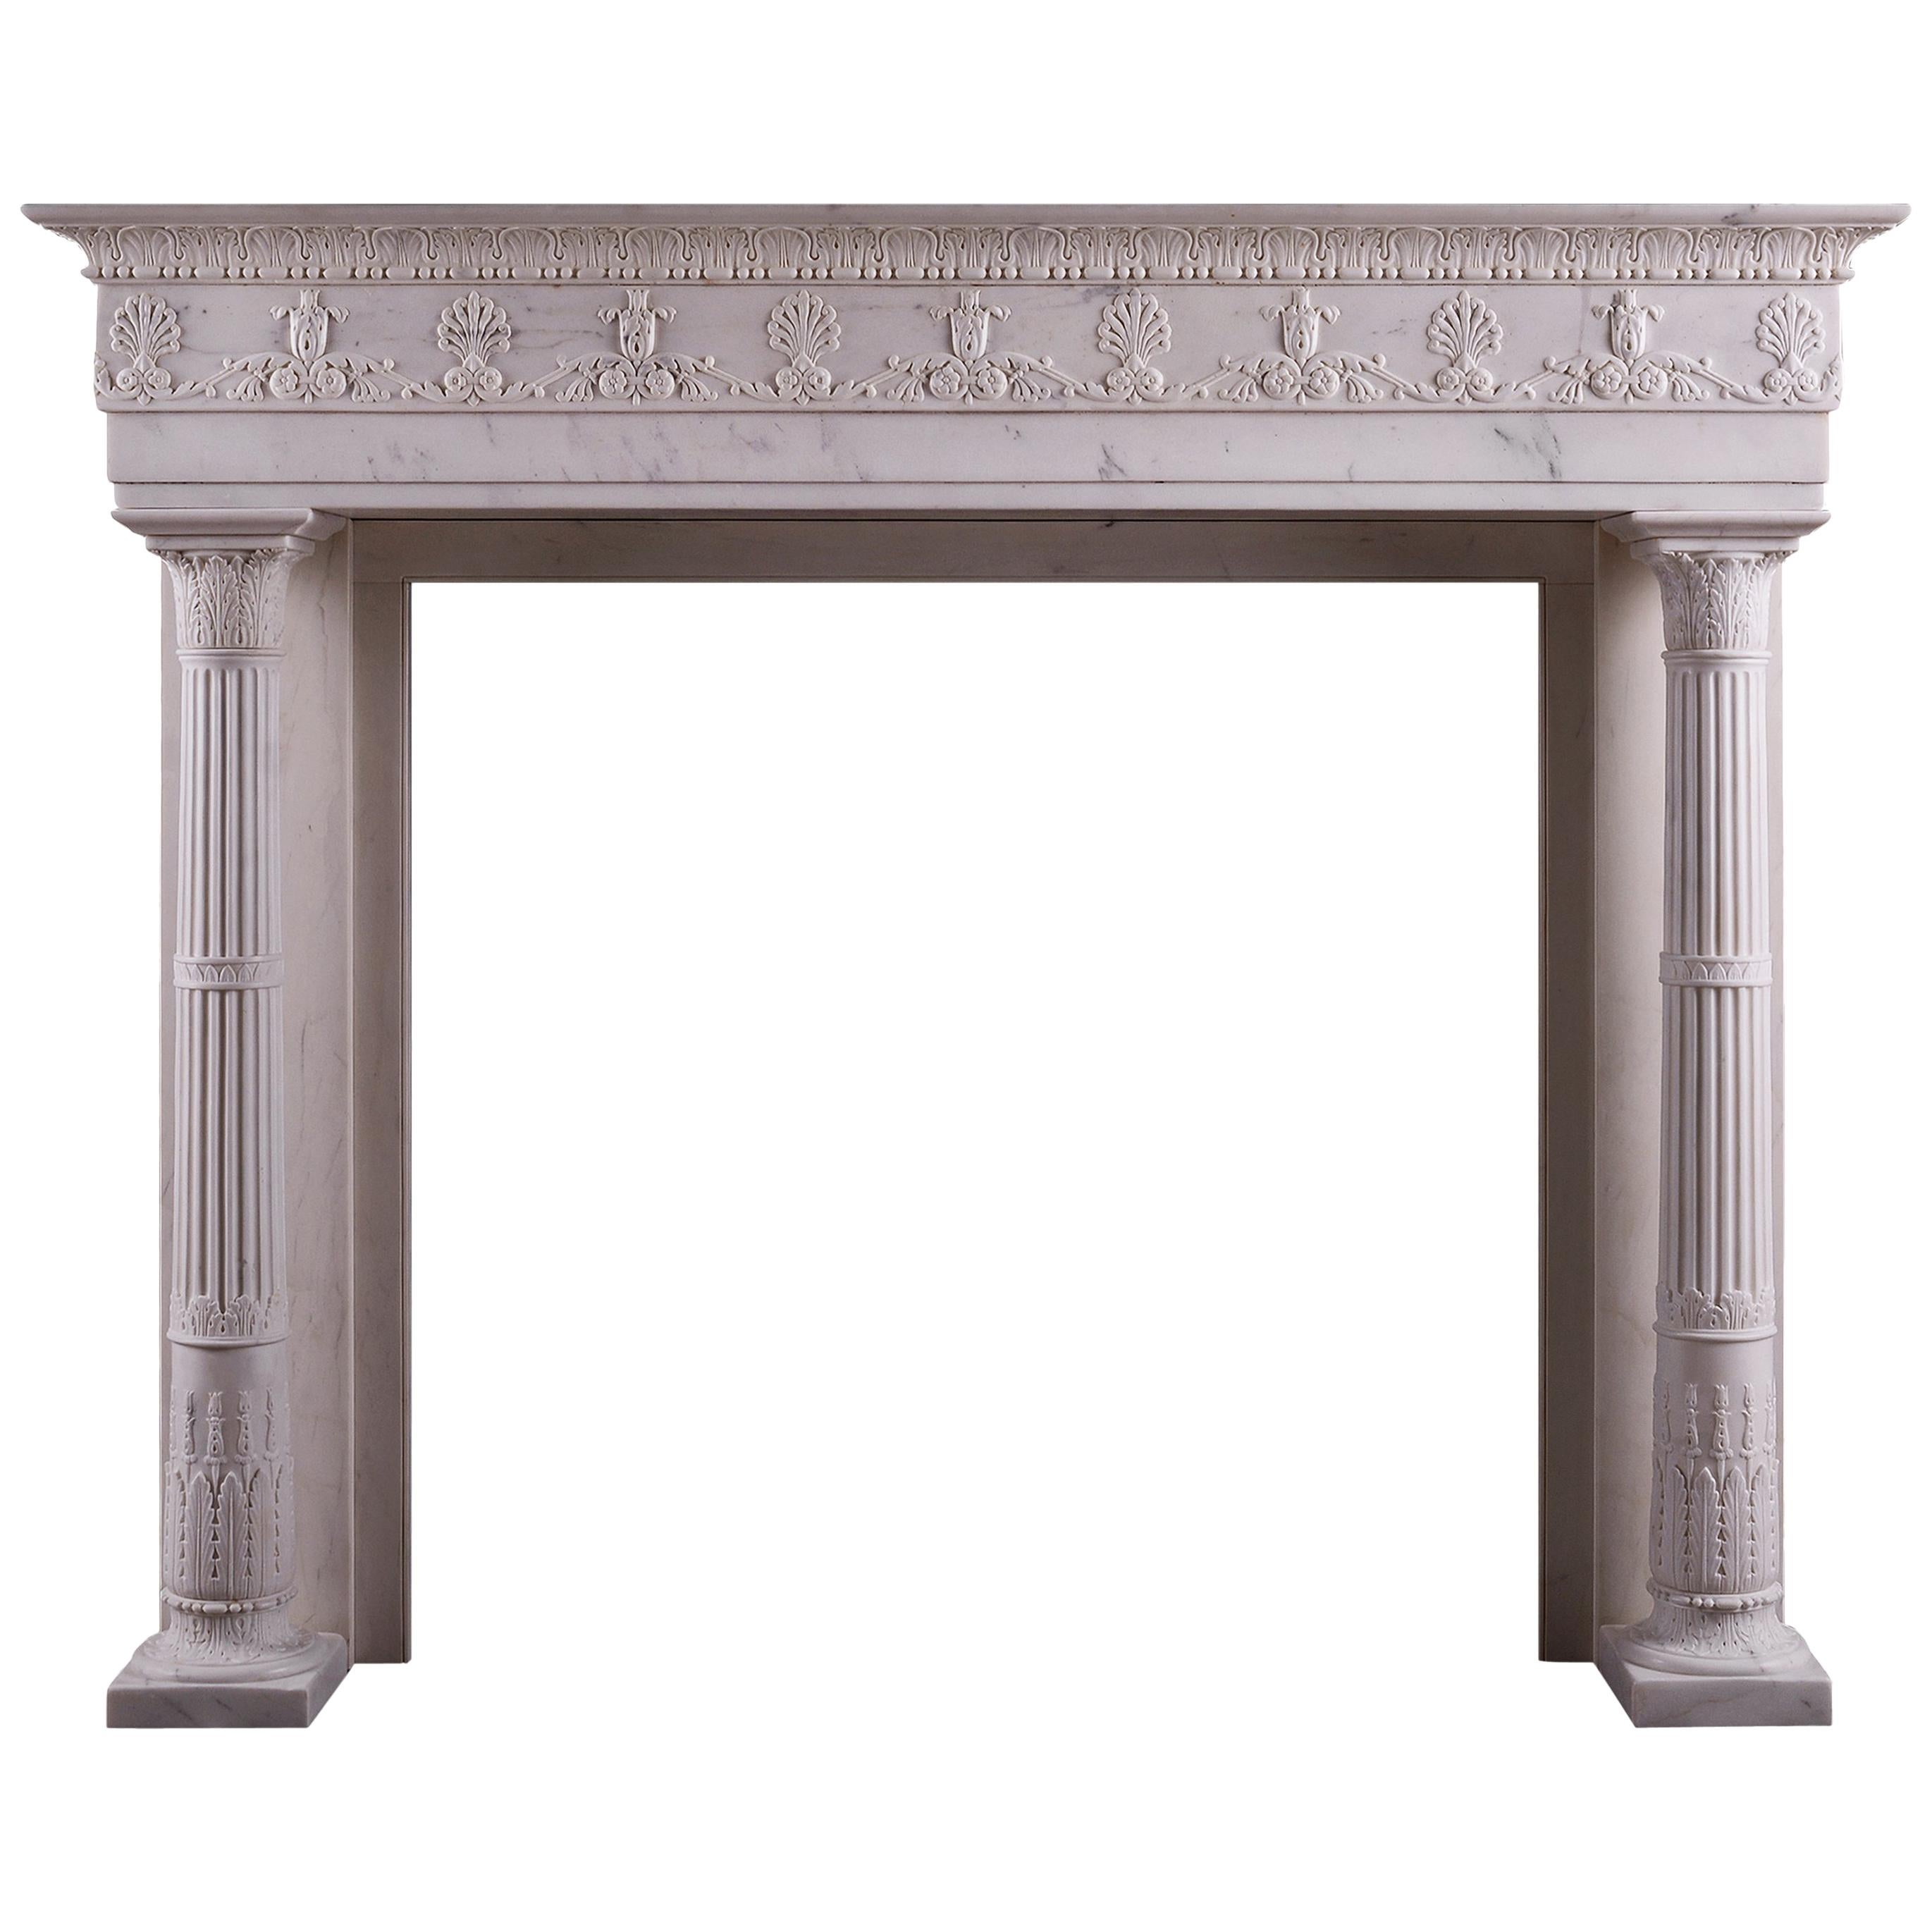 Period Regency Fireplace in Statuary White Marble